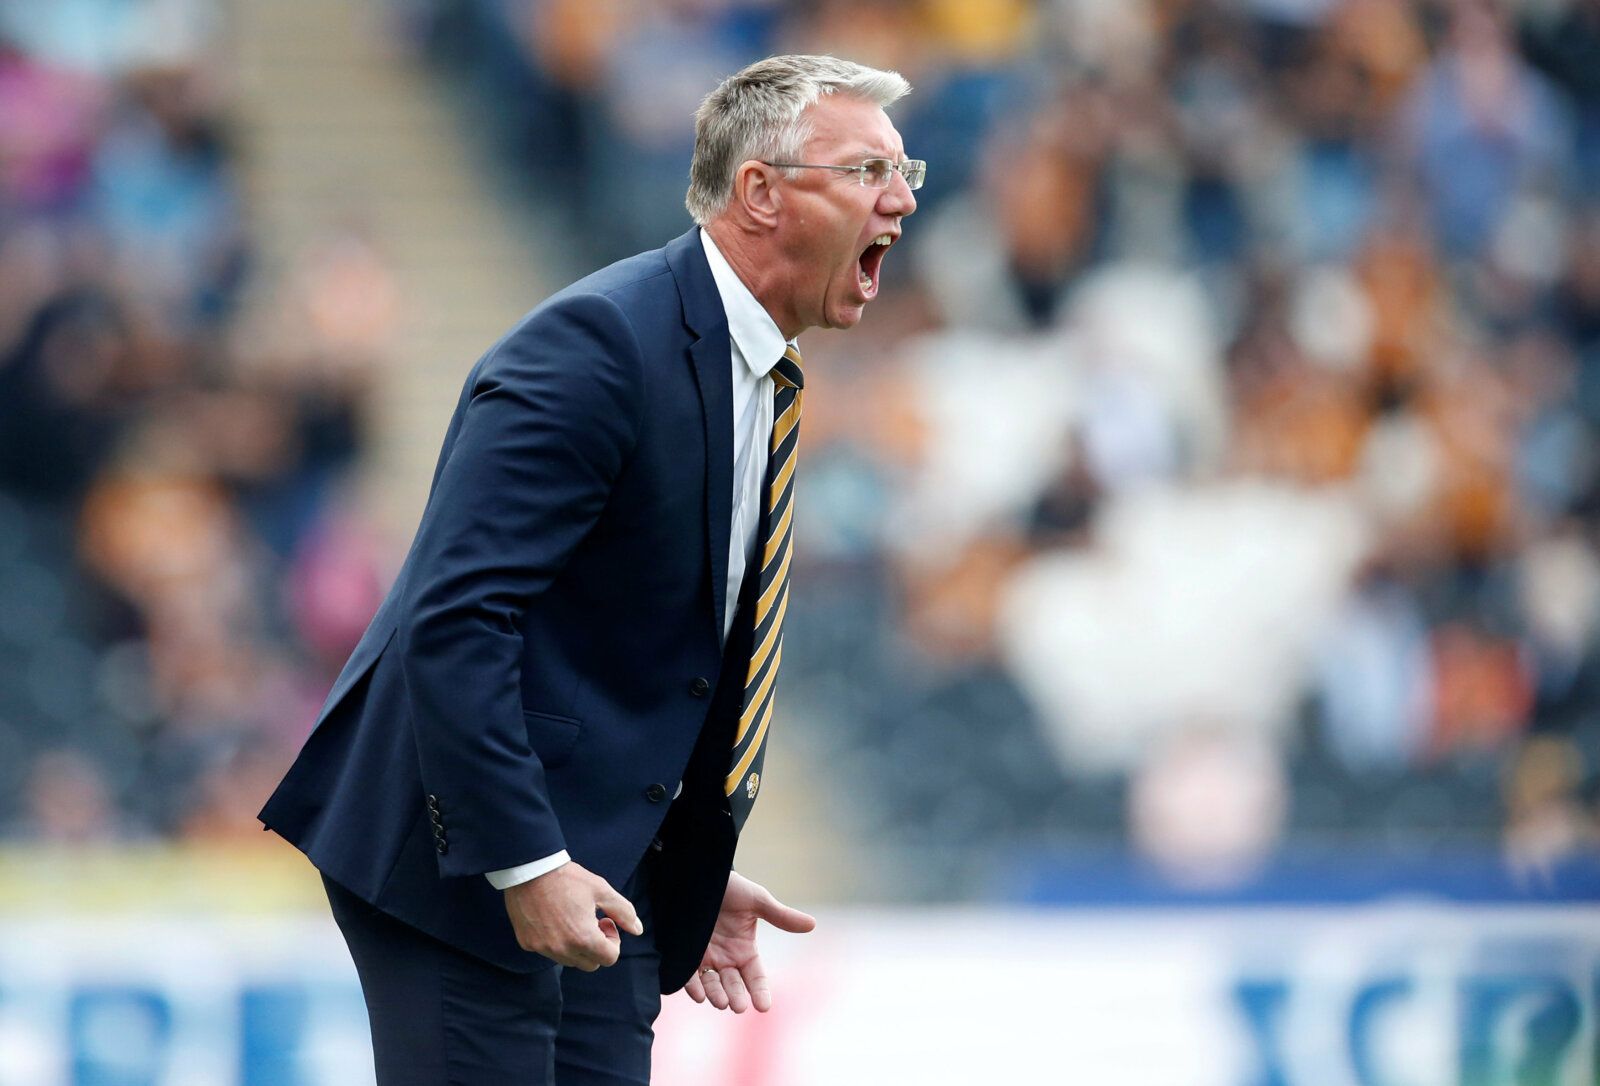 Soccer Football - Championship - Hull City v Sheffield United - KCOM Stadium, Hull, Britain - April 22, 2019  Hull City manager Nigel Adkins  Action Images/Ed Sykes  EDITORIAL USE ONLY. No use with unauthorized audio, video, data, fixture lists, club/league logos or 